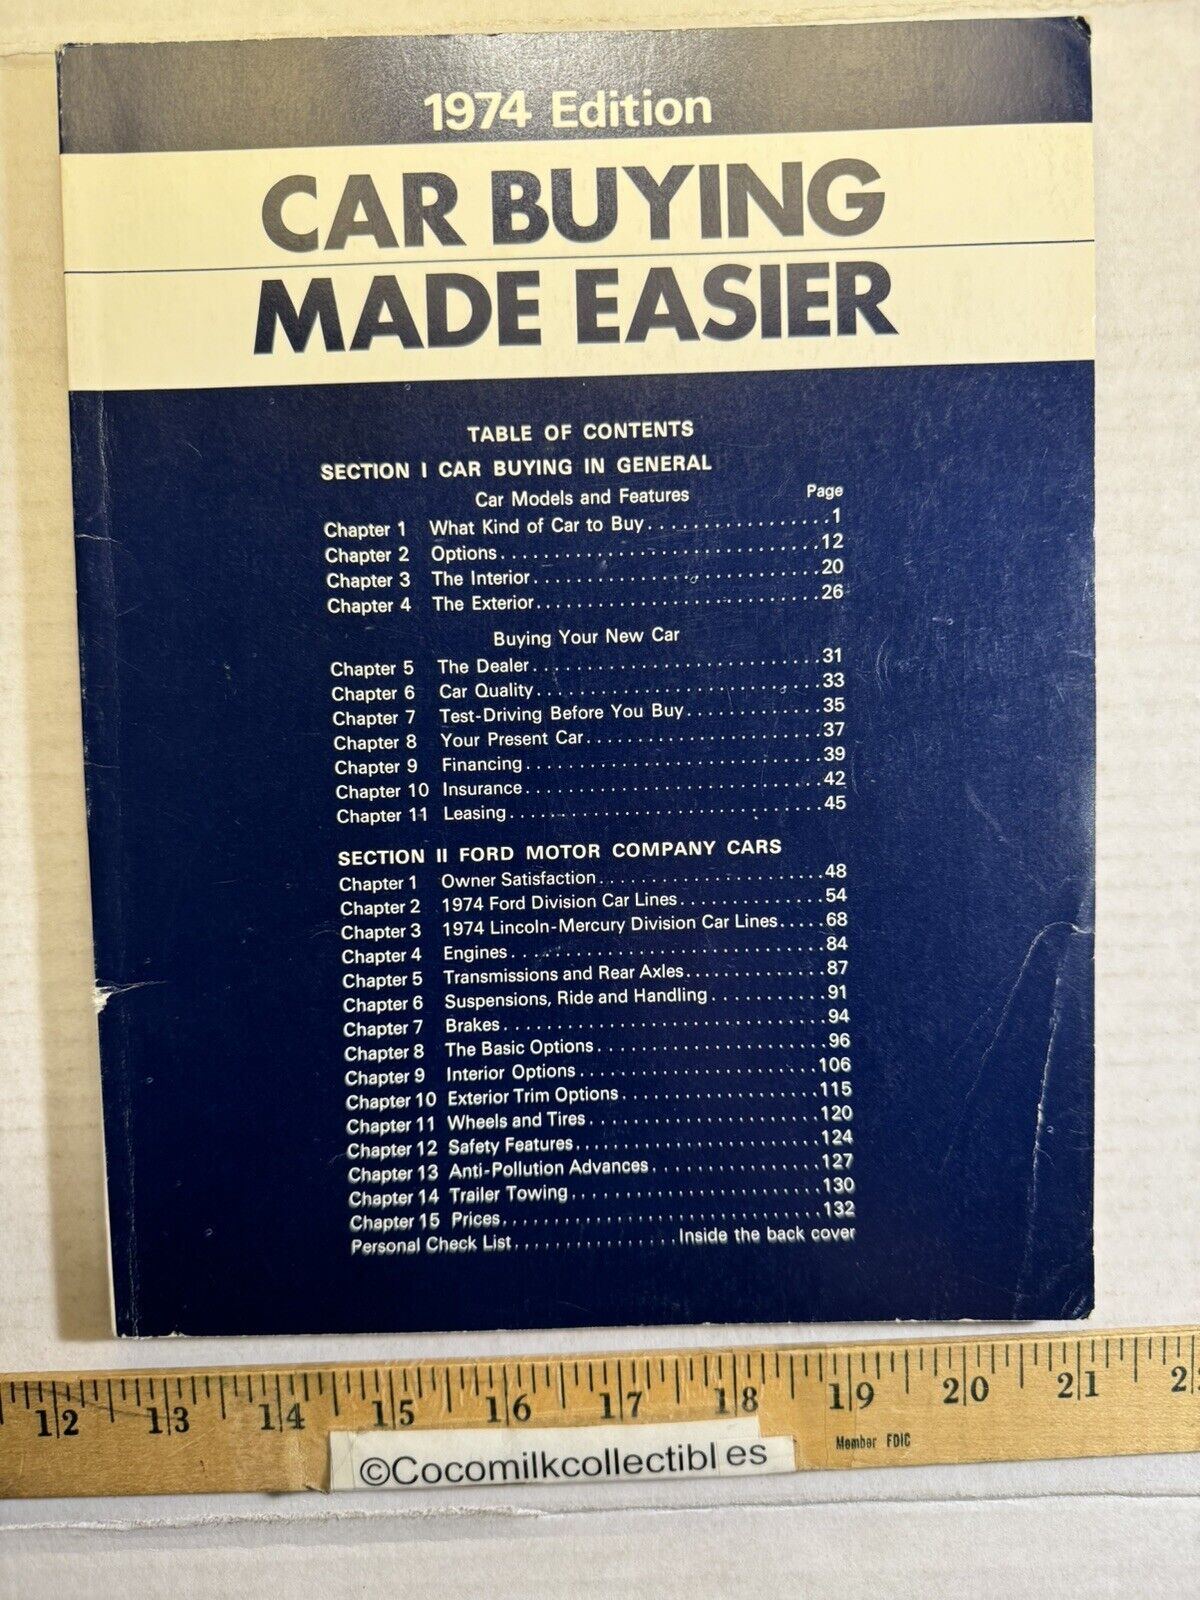 Vintage 1974 Edition Ford Car Buying Made Easier Guide